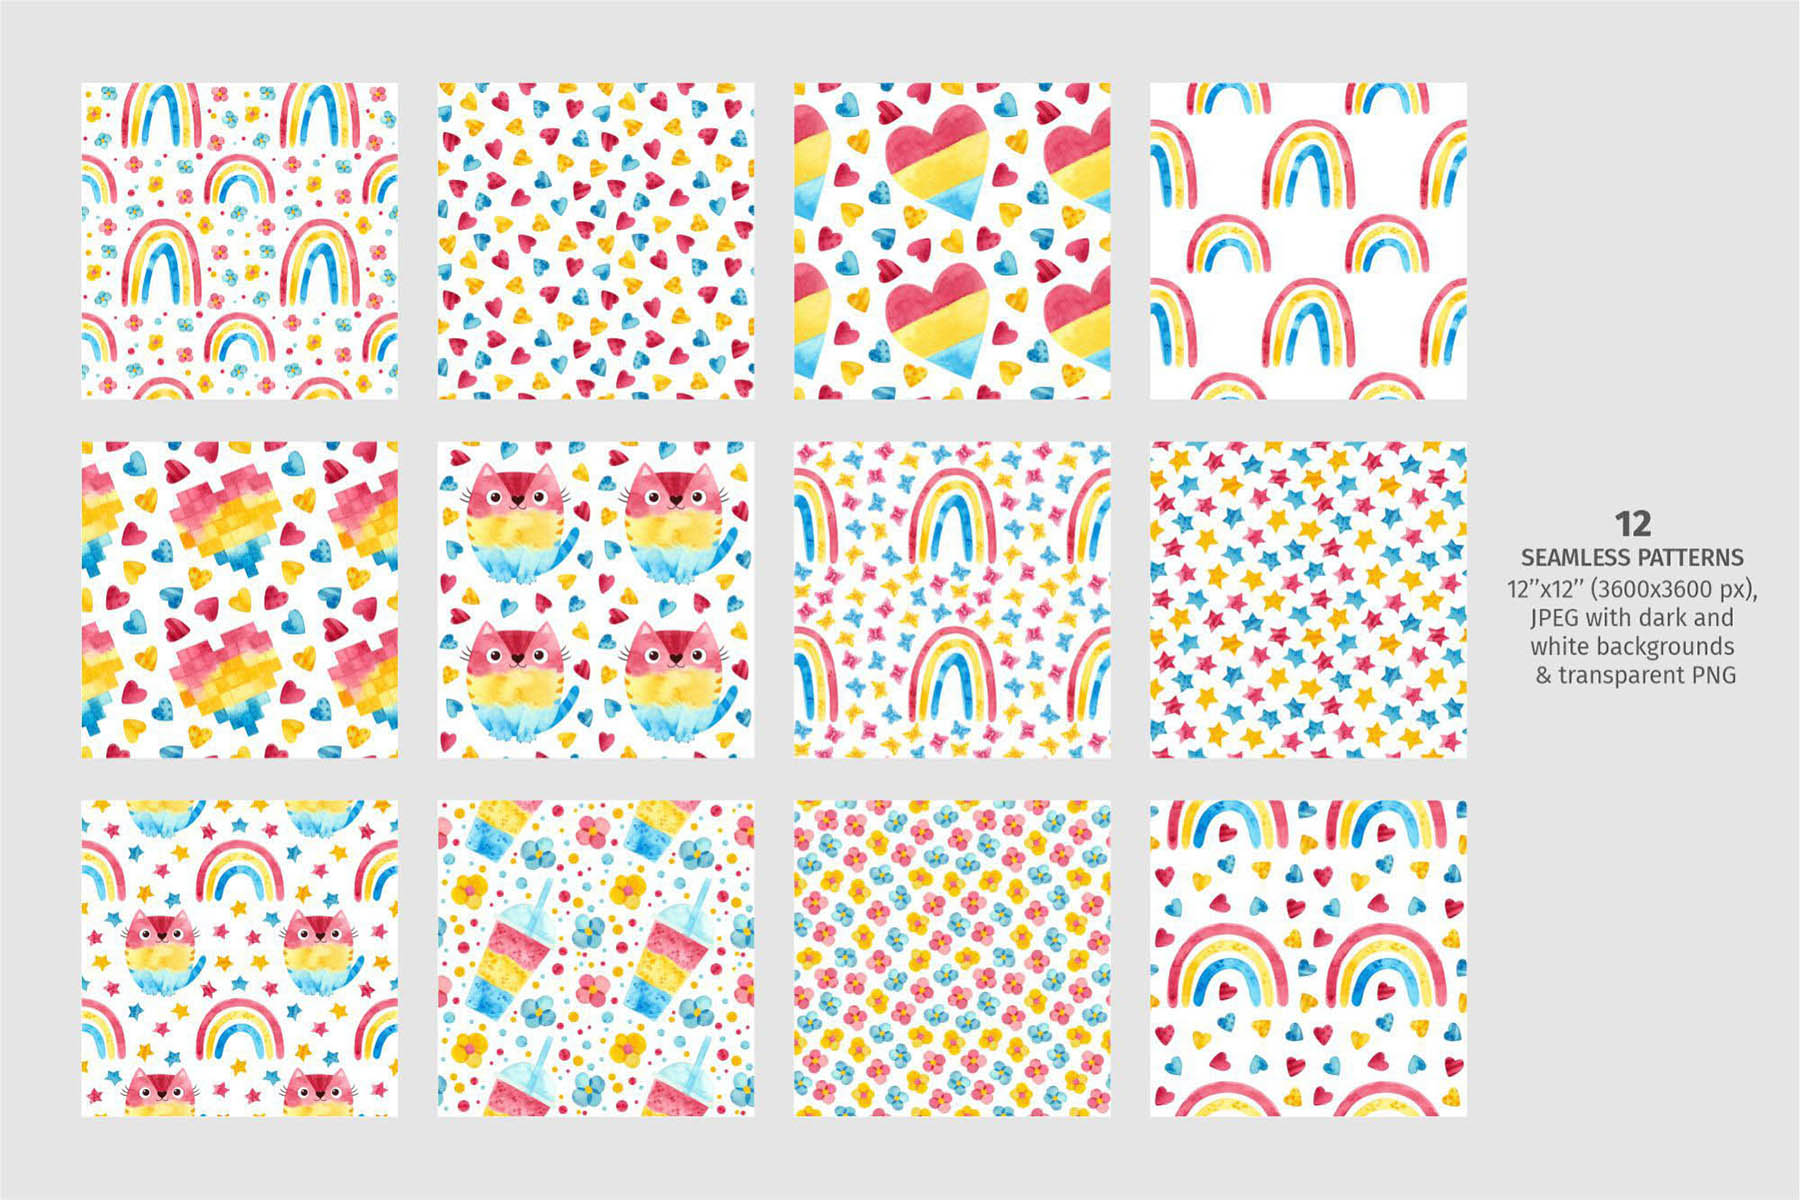 Pansexual pride watercolor clipart & seamless white patterns.